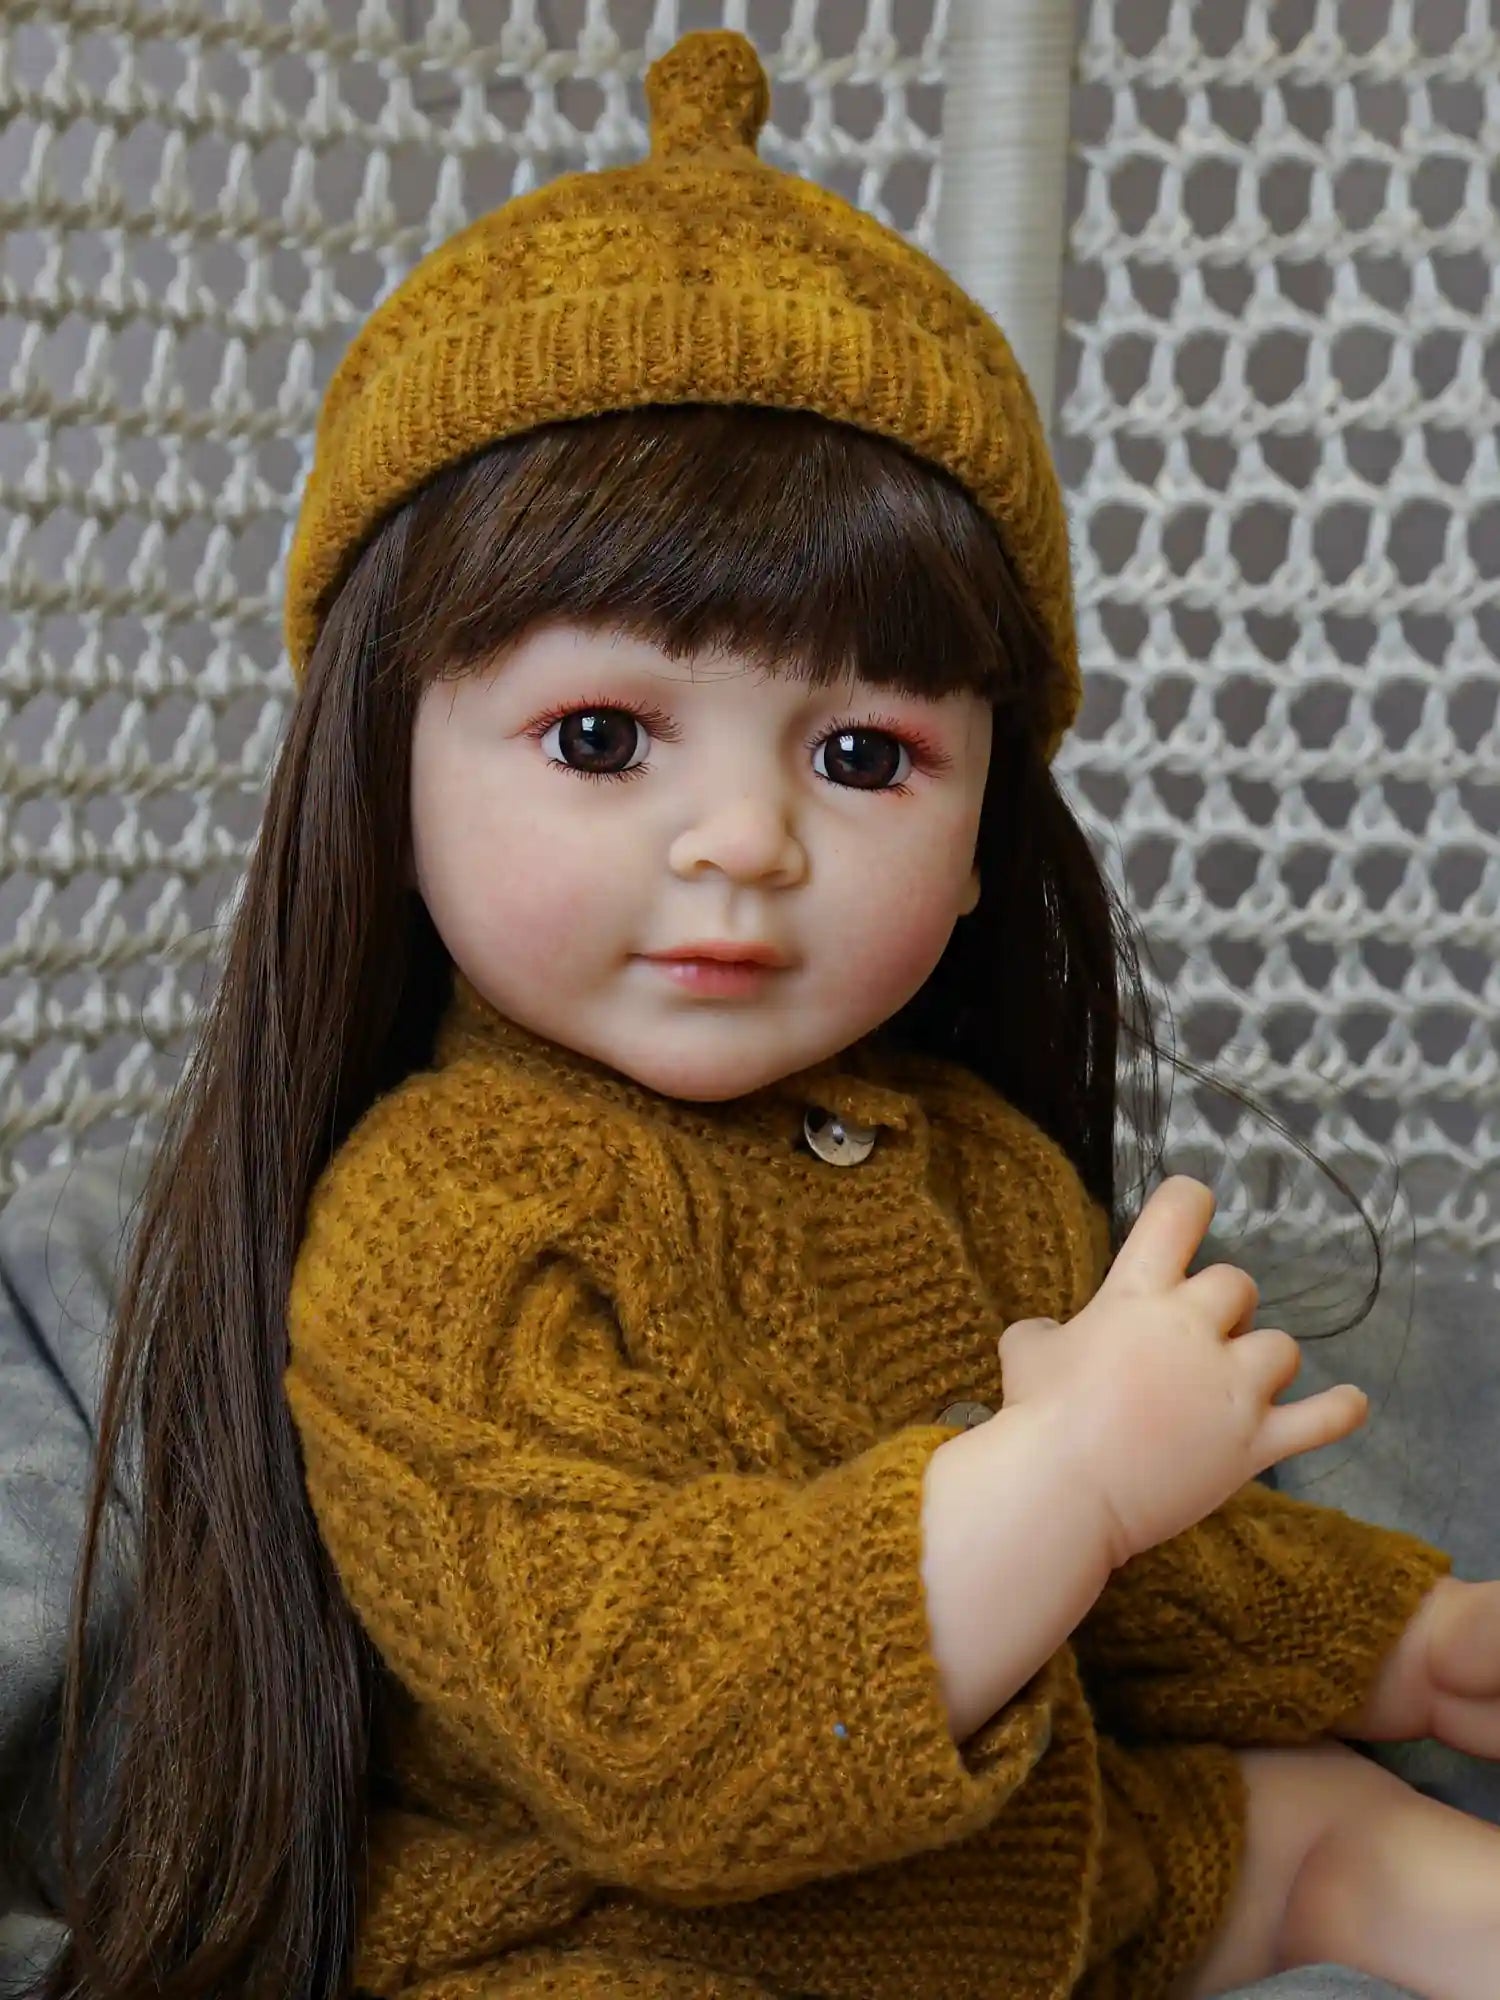 Lifelike doll with long straight brown hair and a knit mustard-yellow beanie, clad in a textured sweater, giving the impression of a contemplative child in autumn.